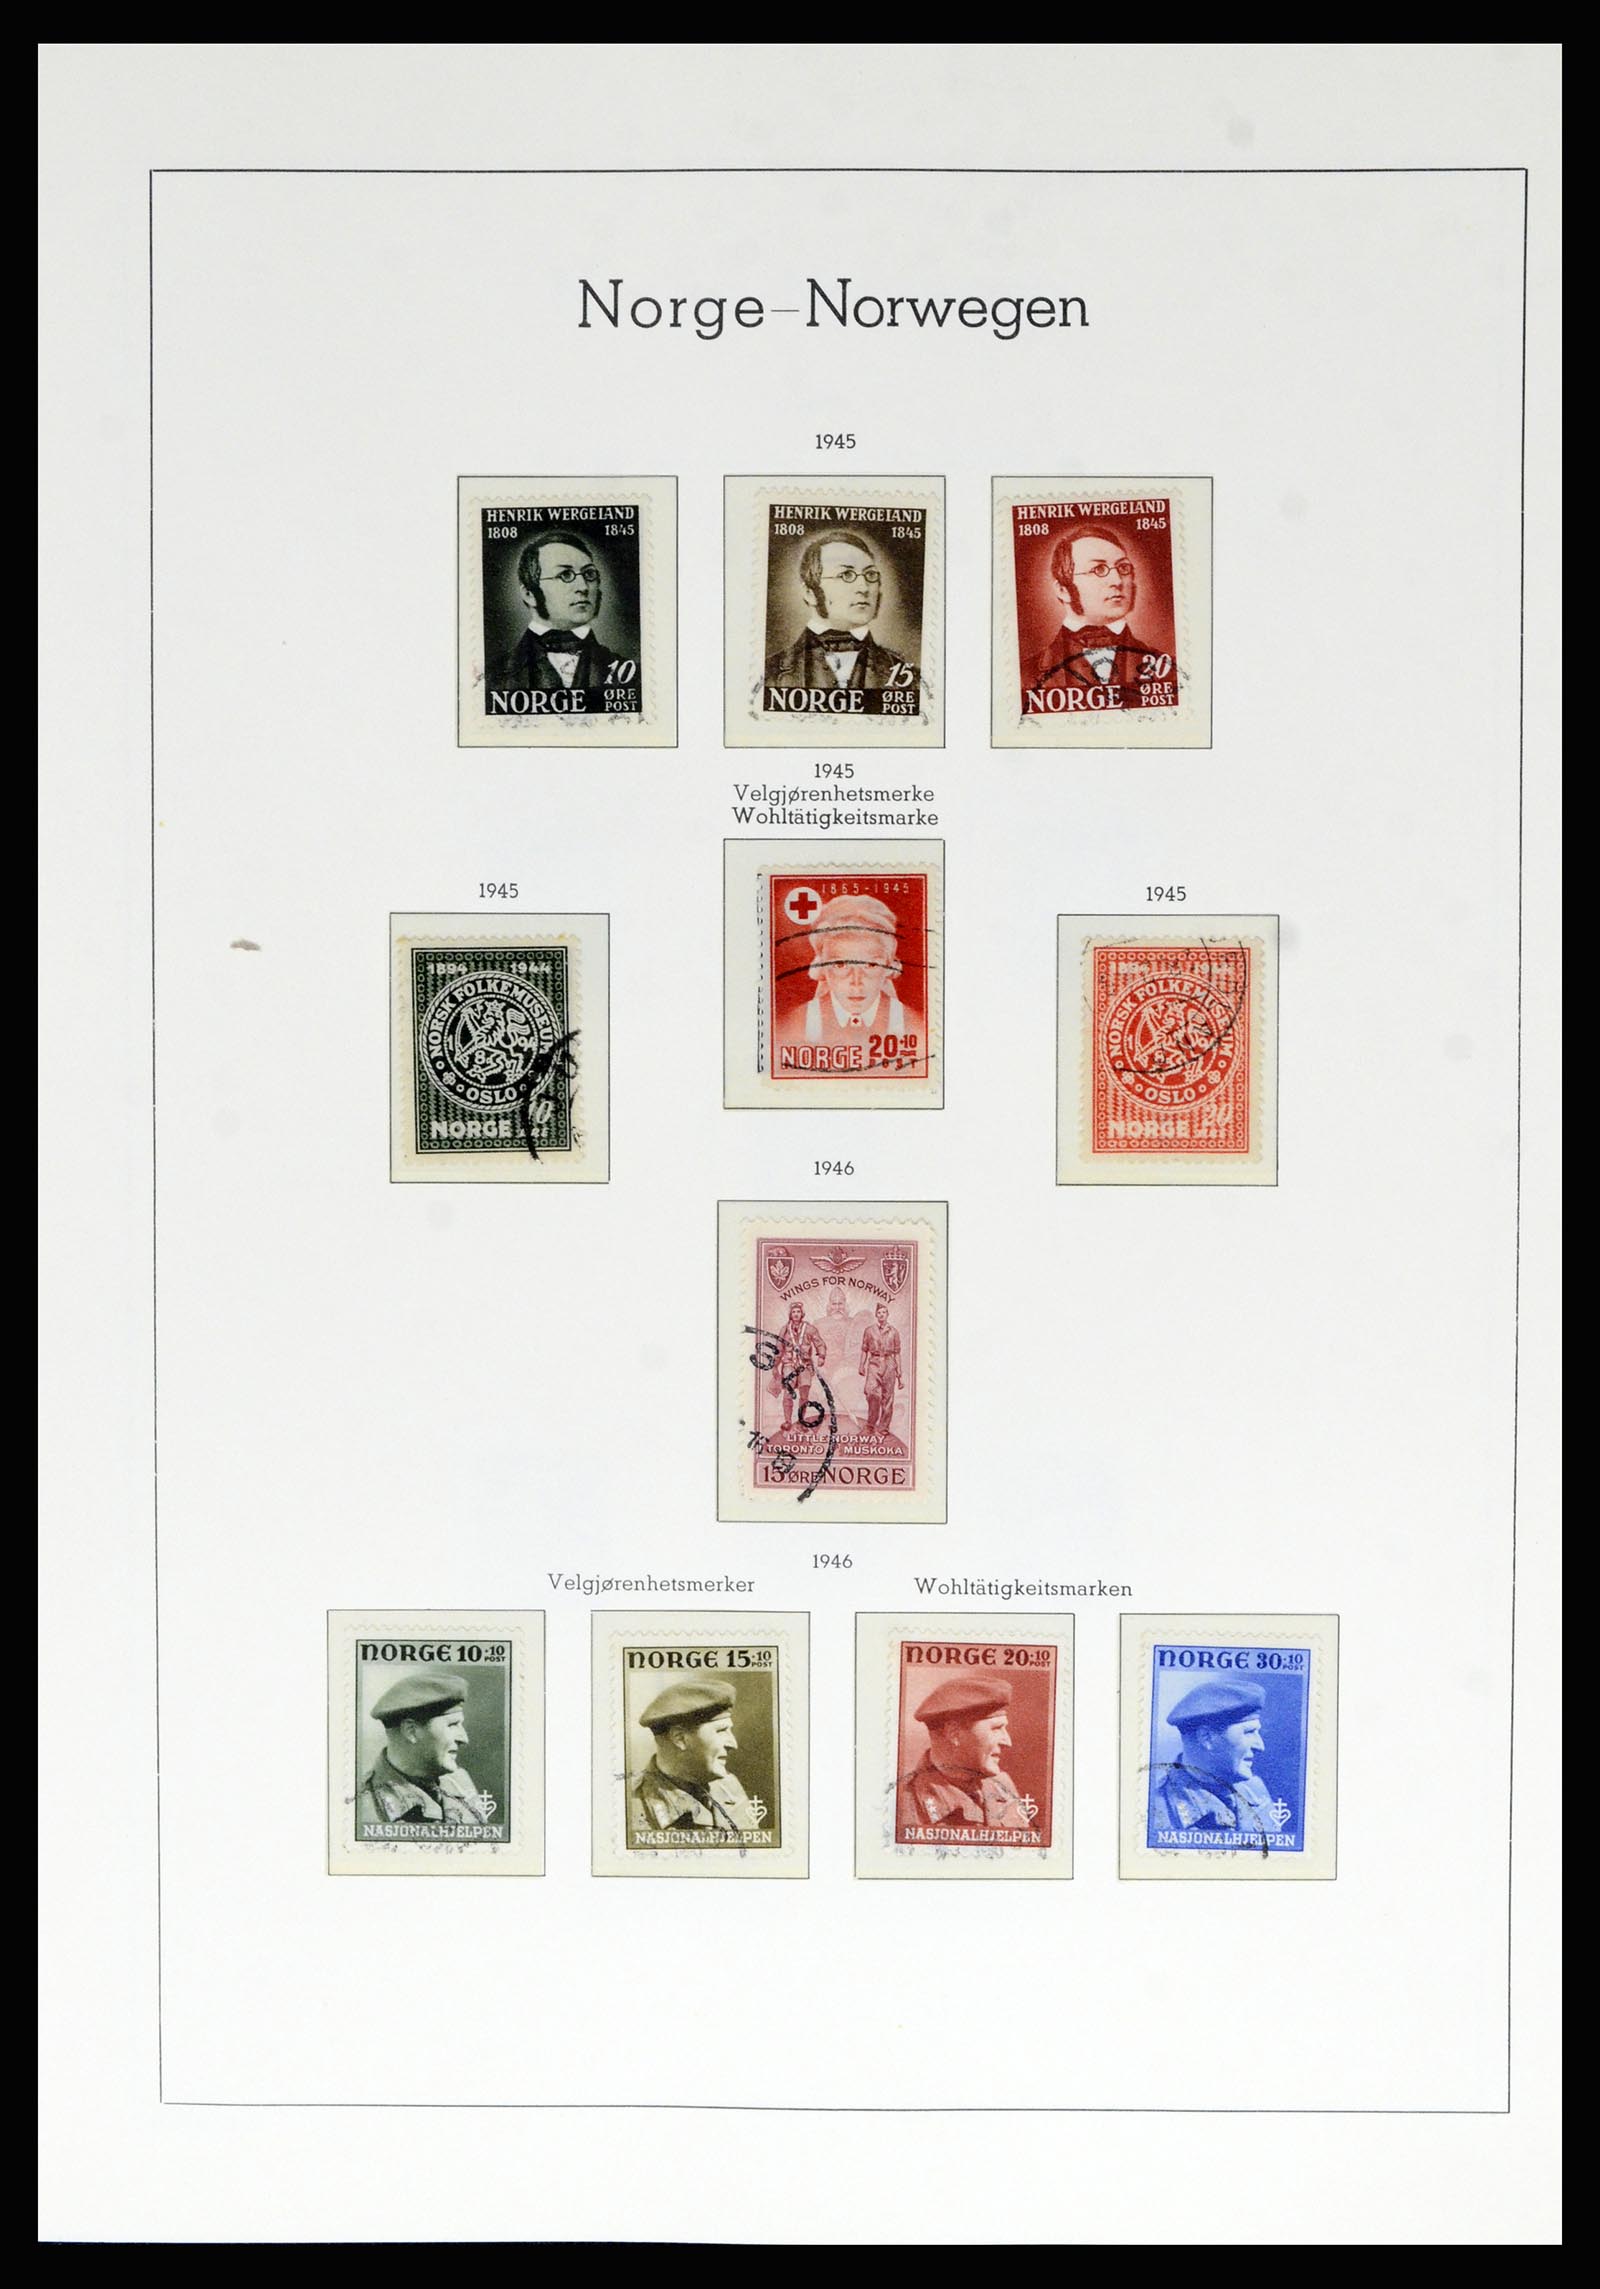 36540 032 - Stamp collection 36540 Norway 1855-2019!